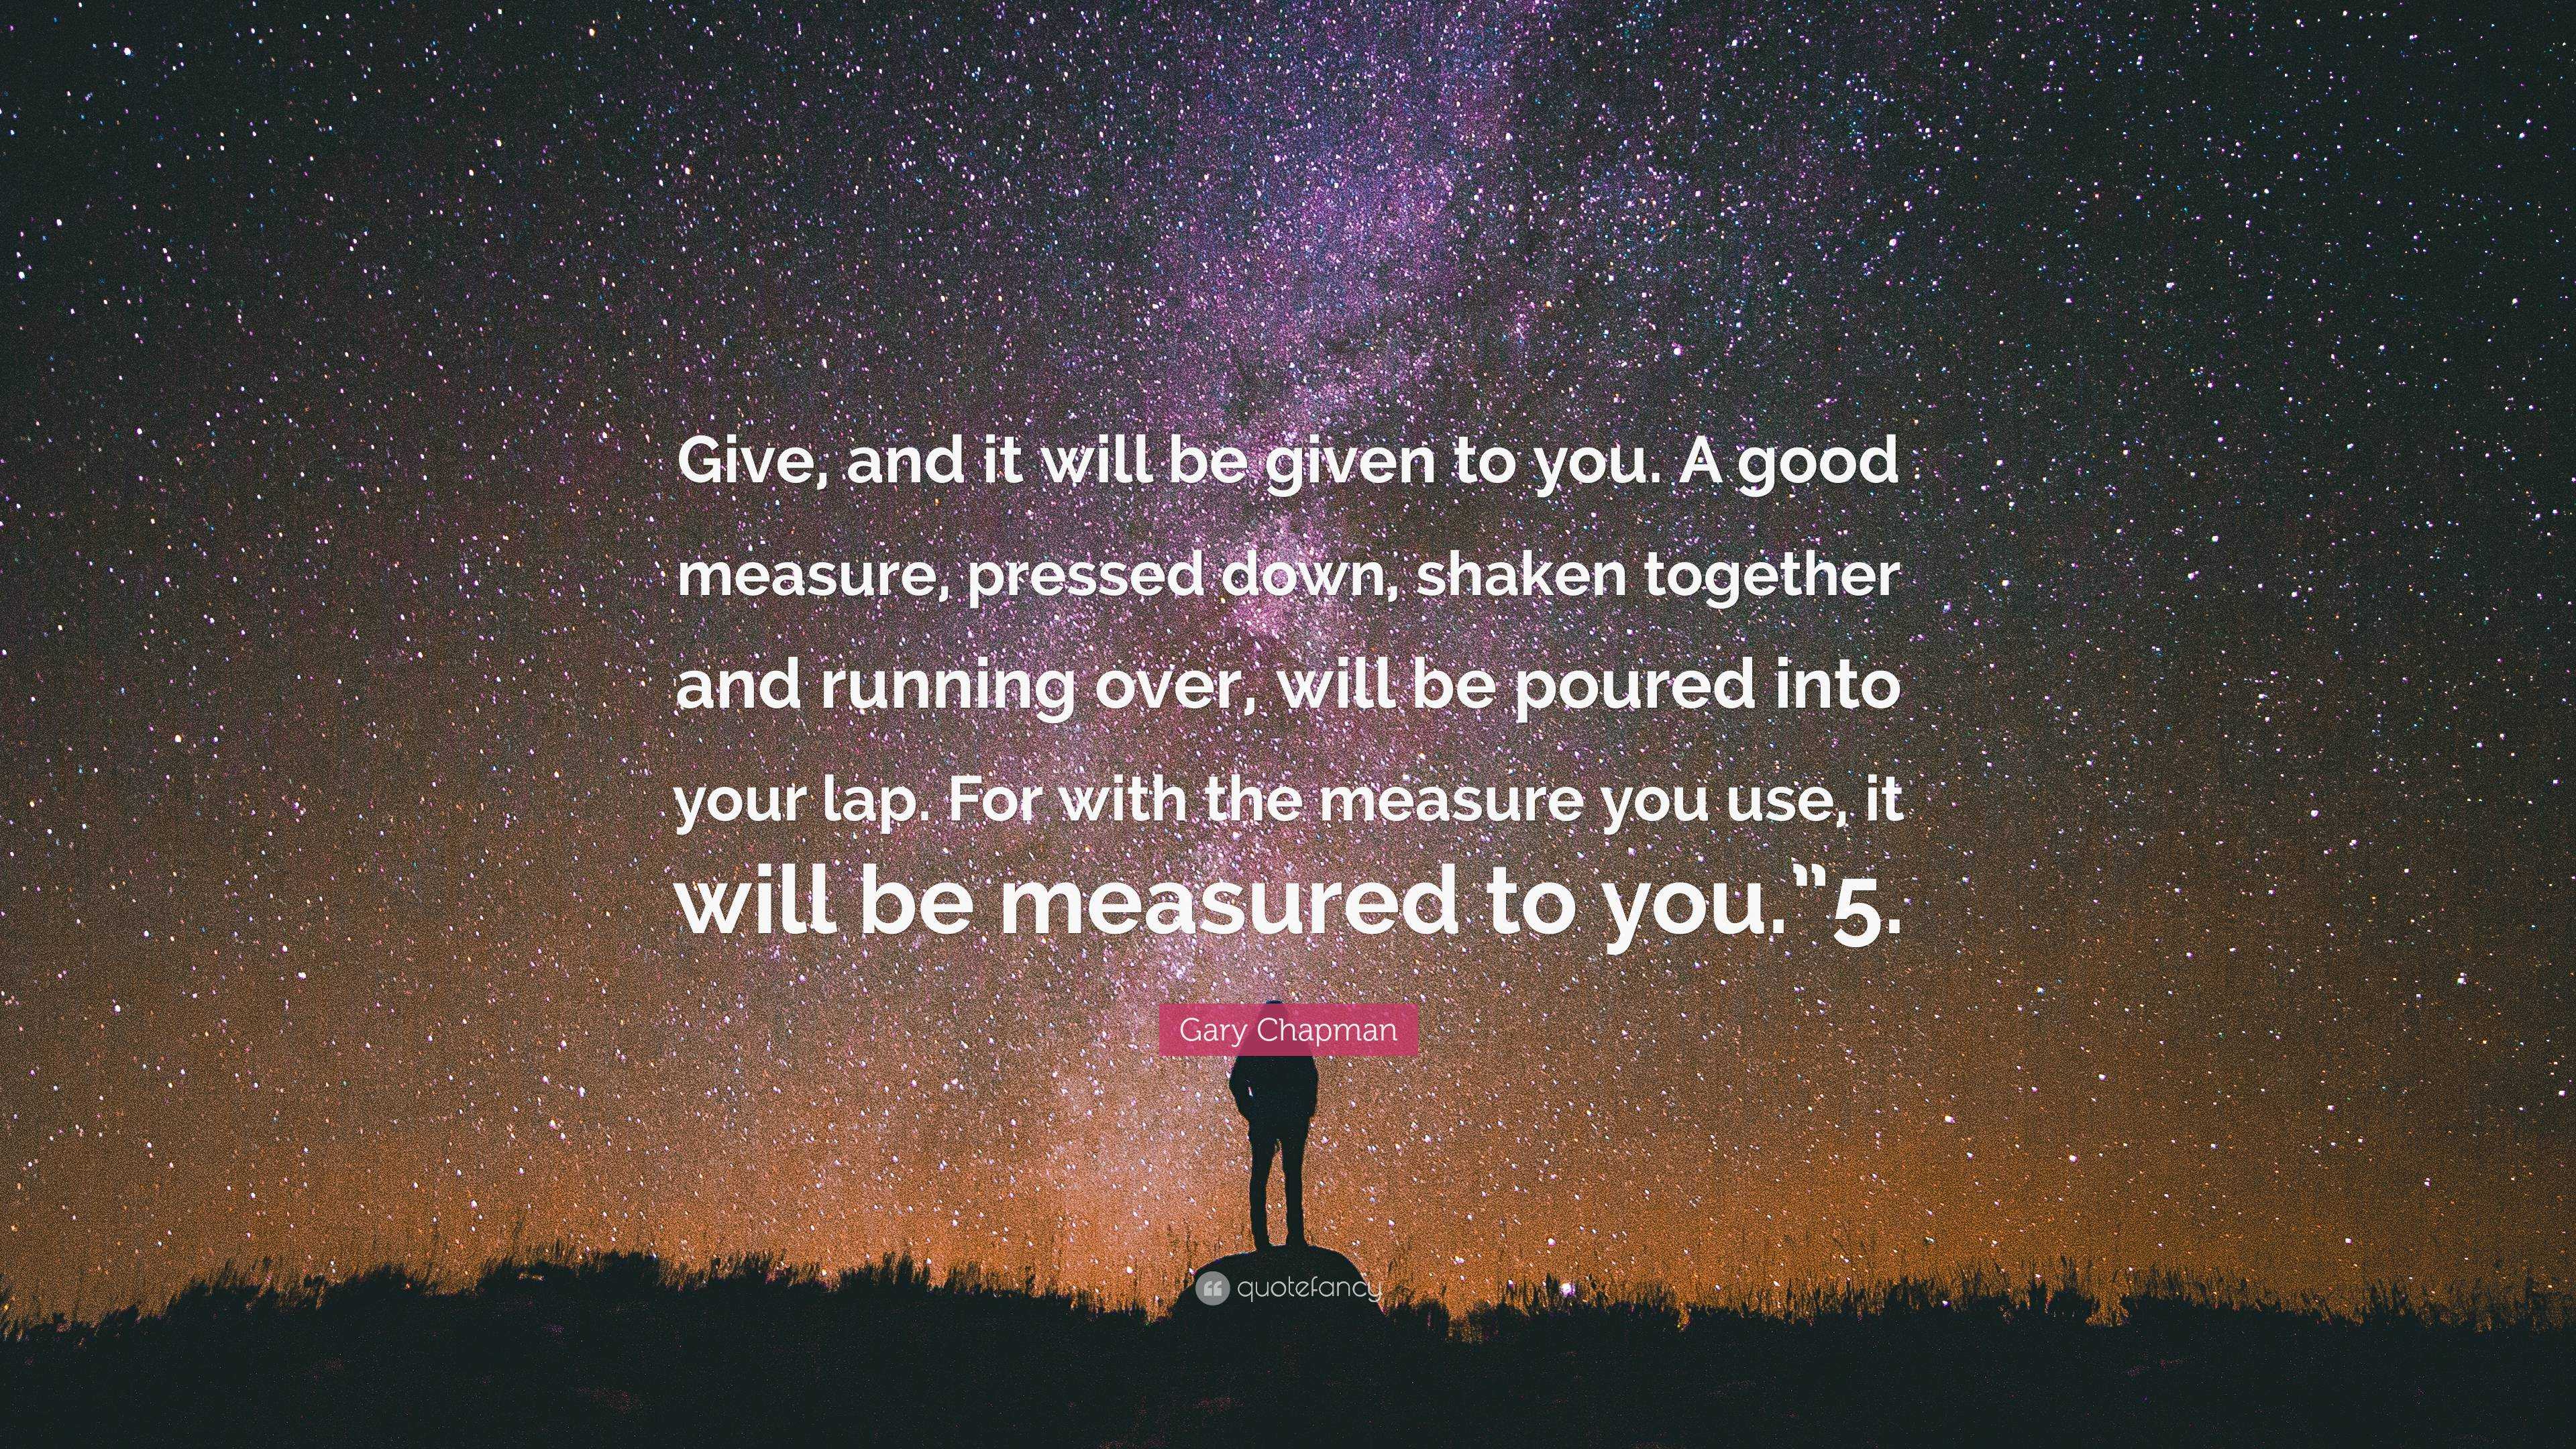 Gary Chapman Quote: “Give, and it will be given to you. A good measure,  pressed down, shaken together and running over, will be poured into y”